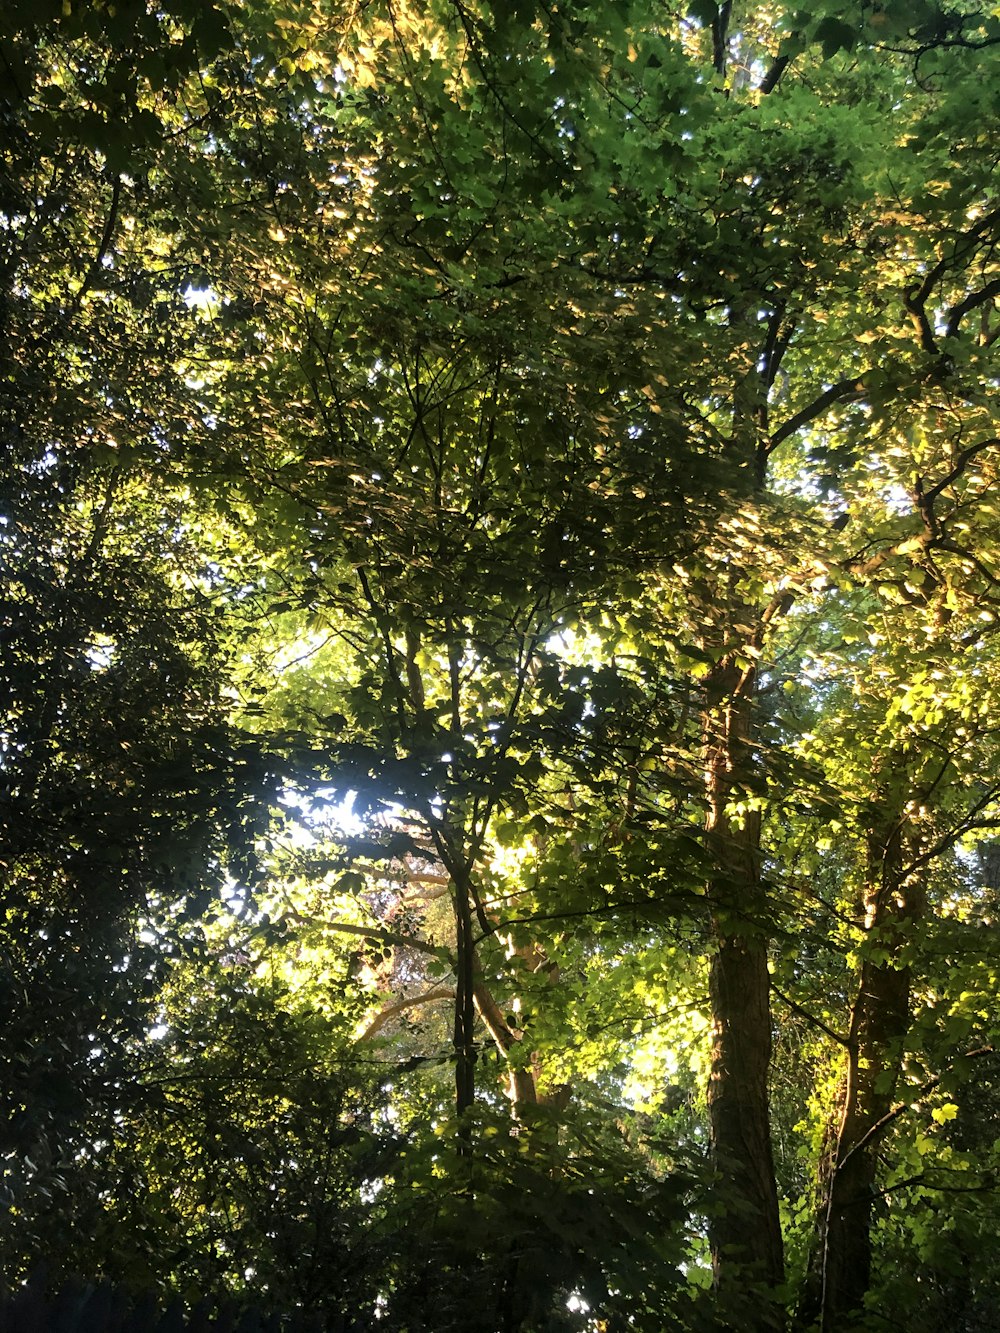 looking up at trees with green leaves